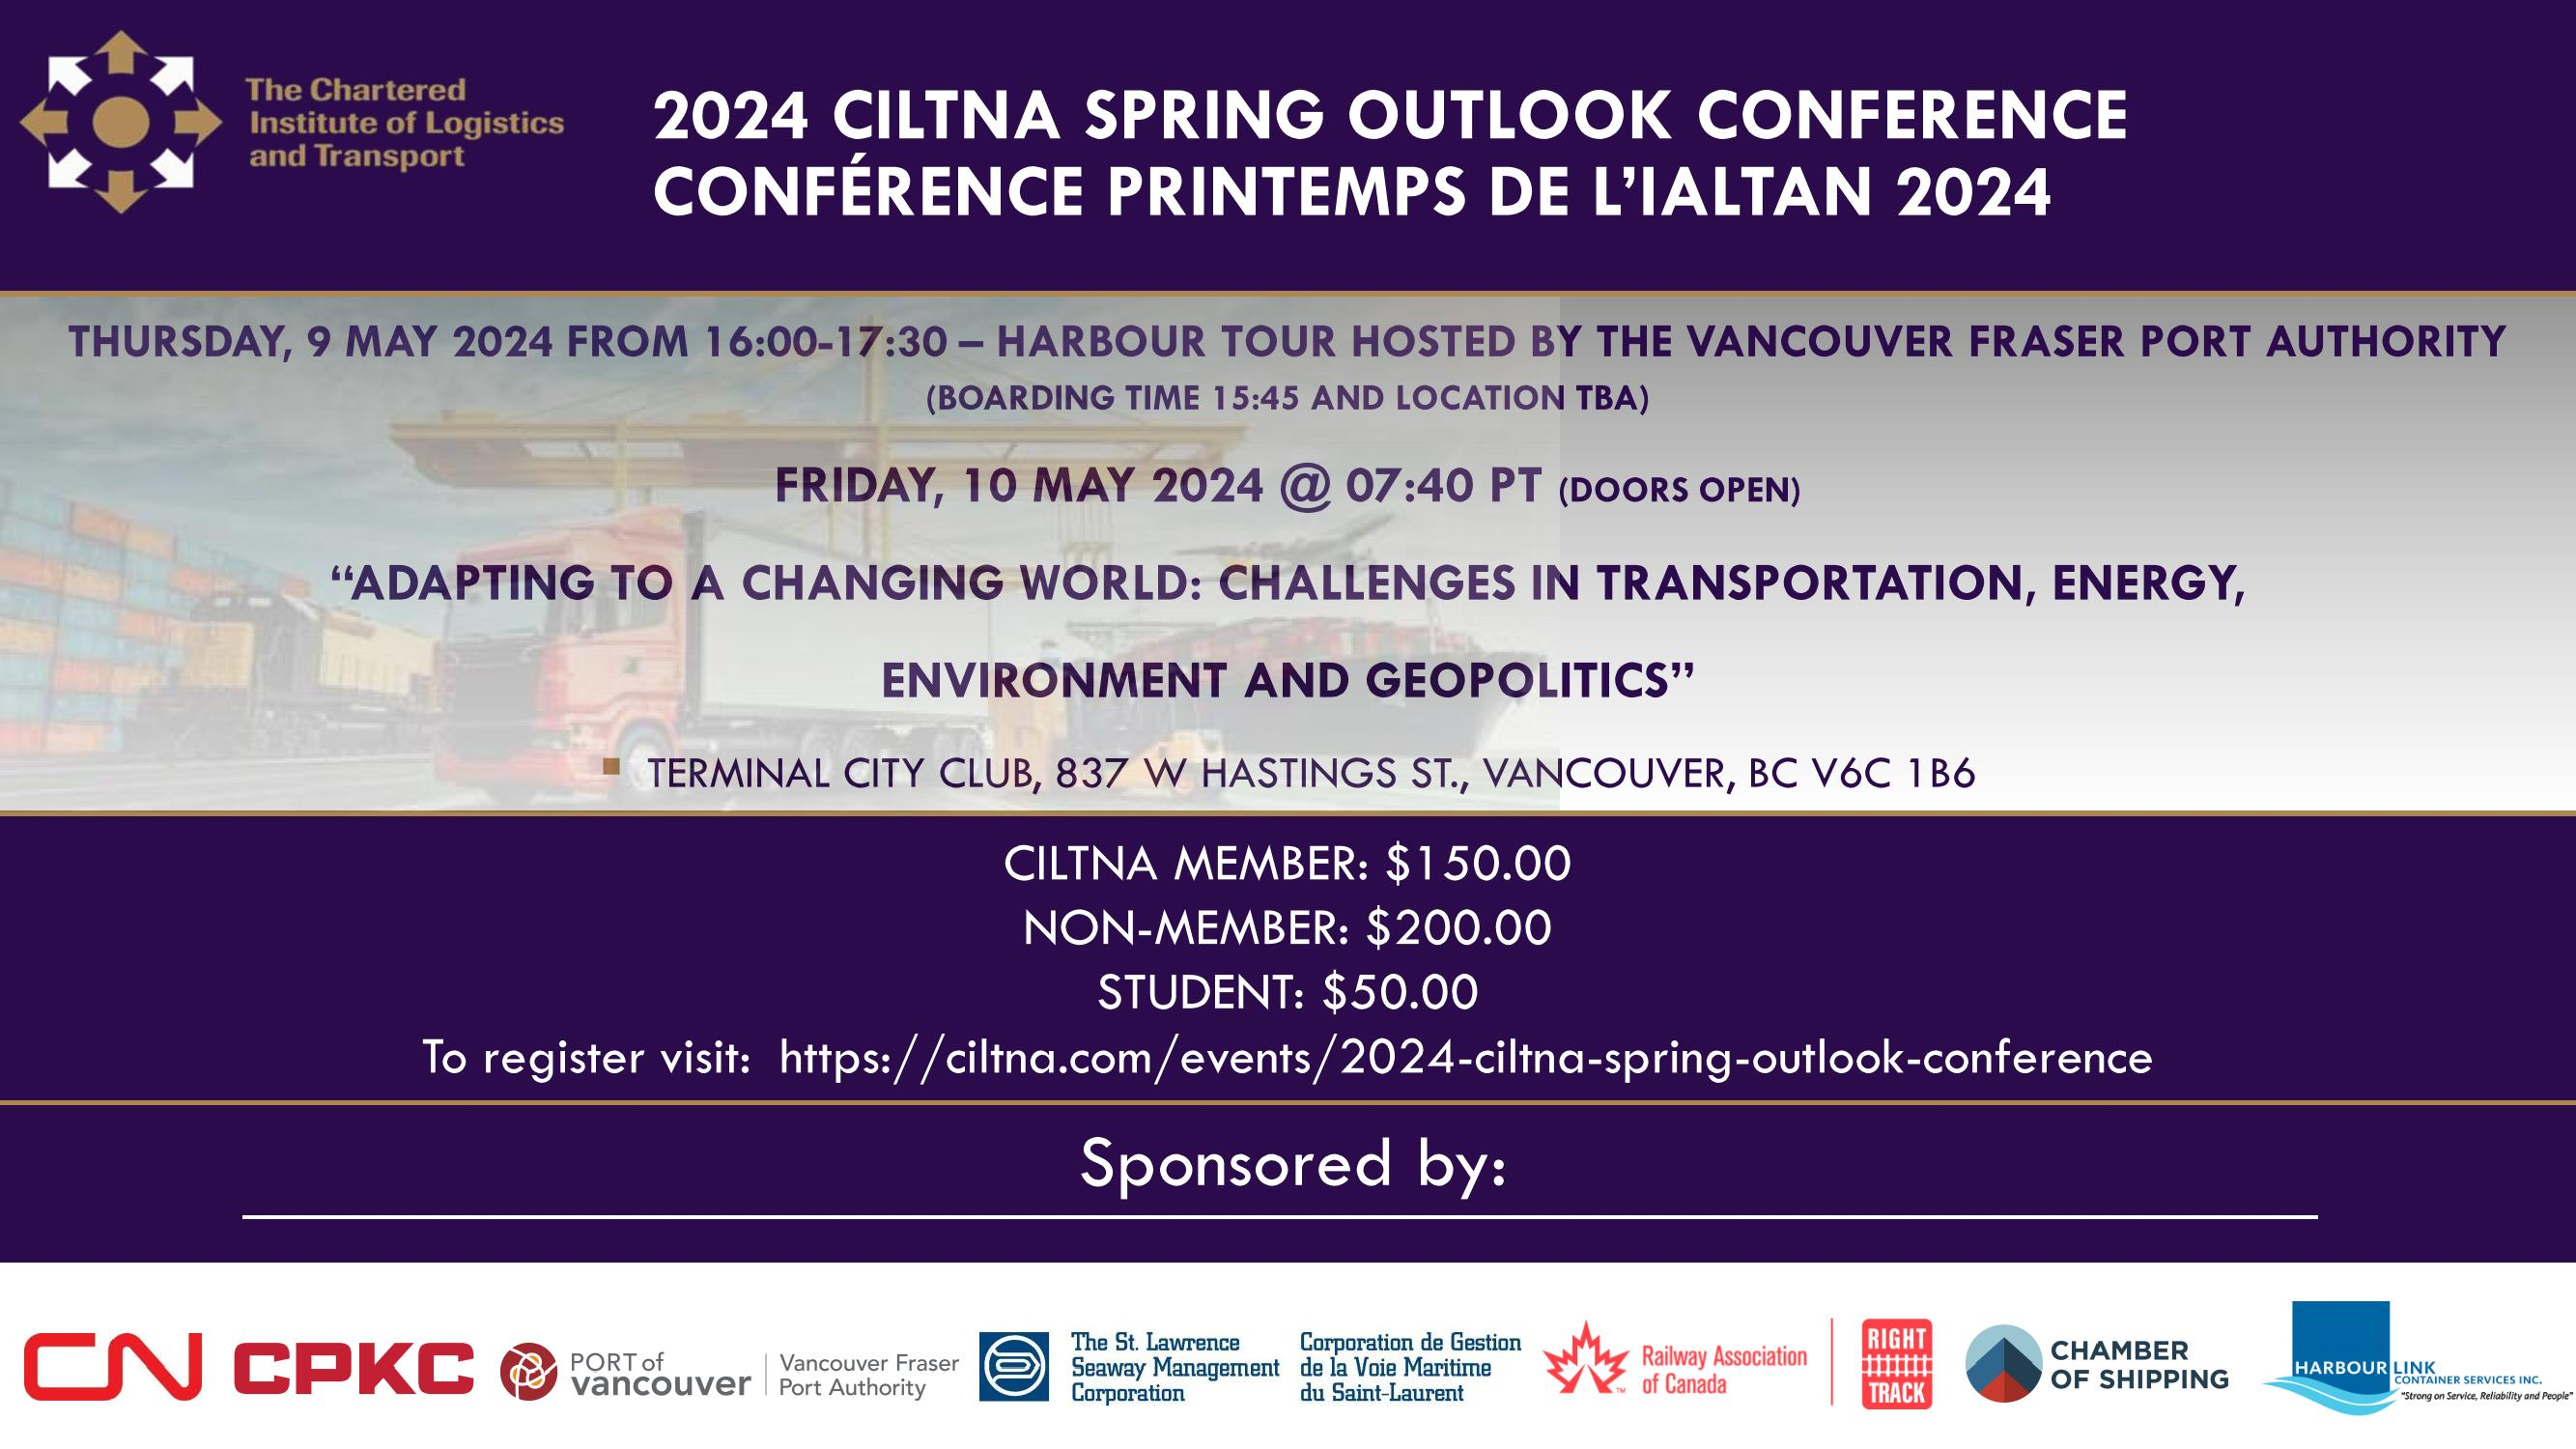 9-10 May 2024 - 2024 CILTNA Annual Spring Outlook Conference:  “Adapting to a Changing World: Challenges in Transportation, Energy,  Environment and Geopolitics”